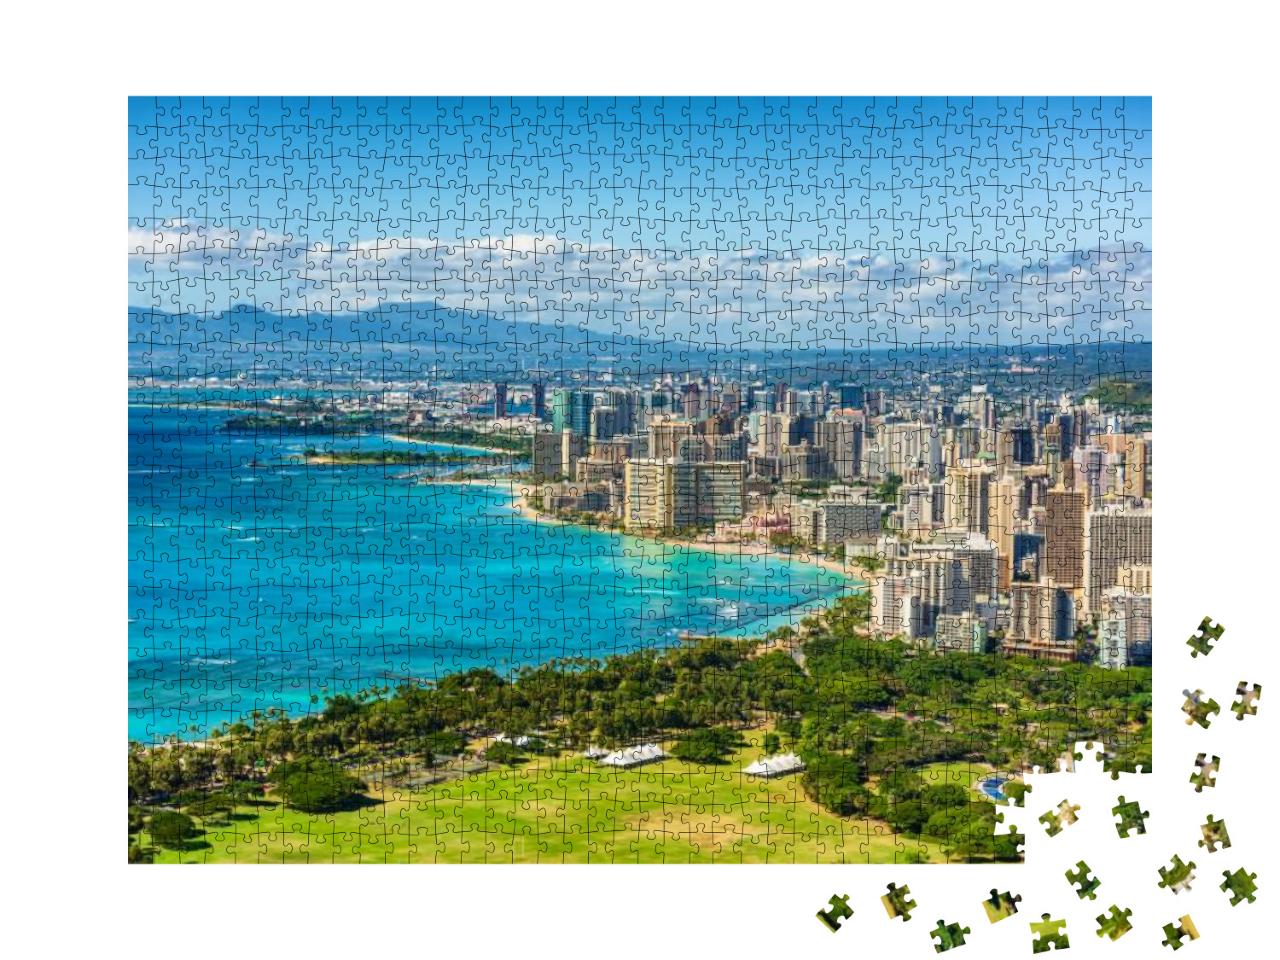 Honolulu City View from Diamond Head Lookout, Waikiki Bea... Jigsaw Puzzle with 1000 pieces